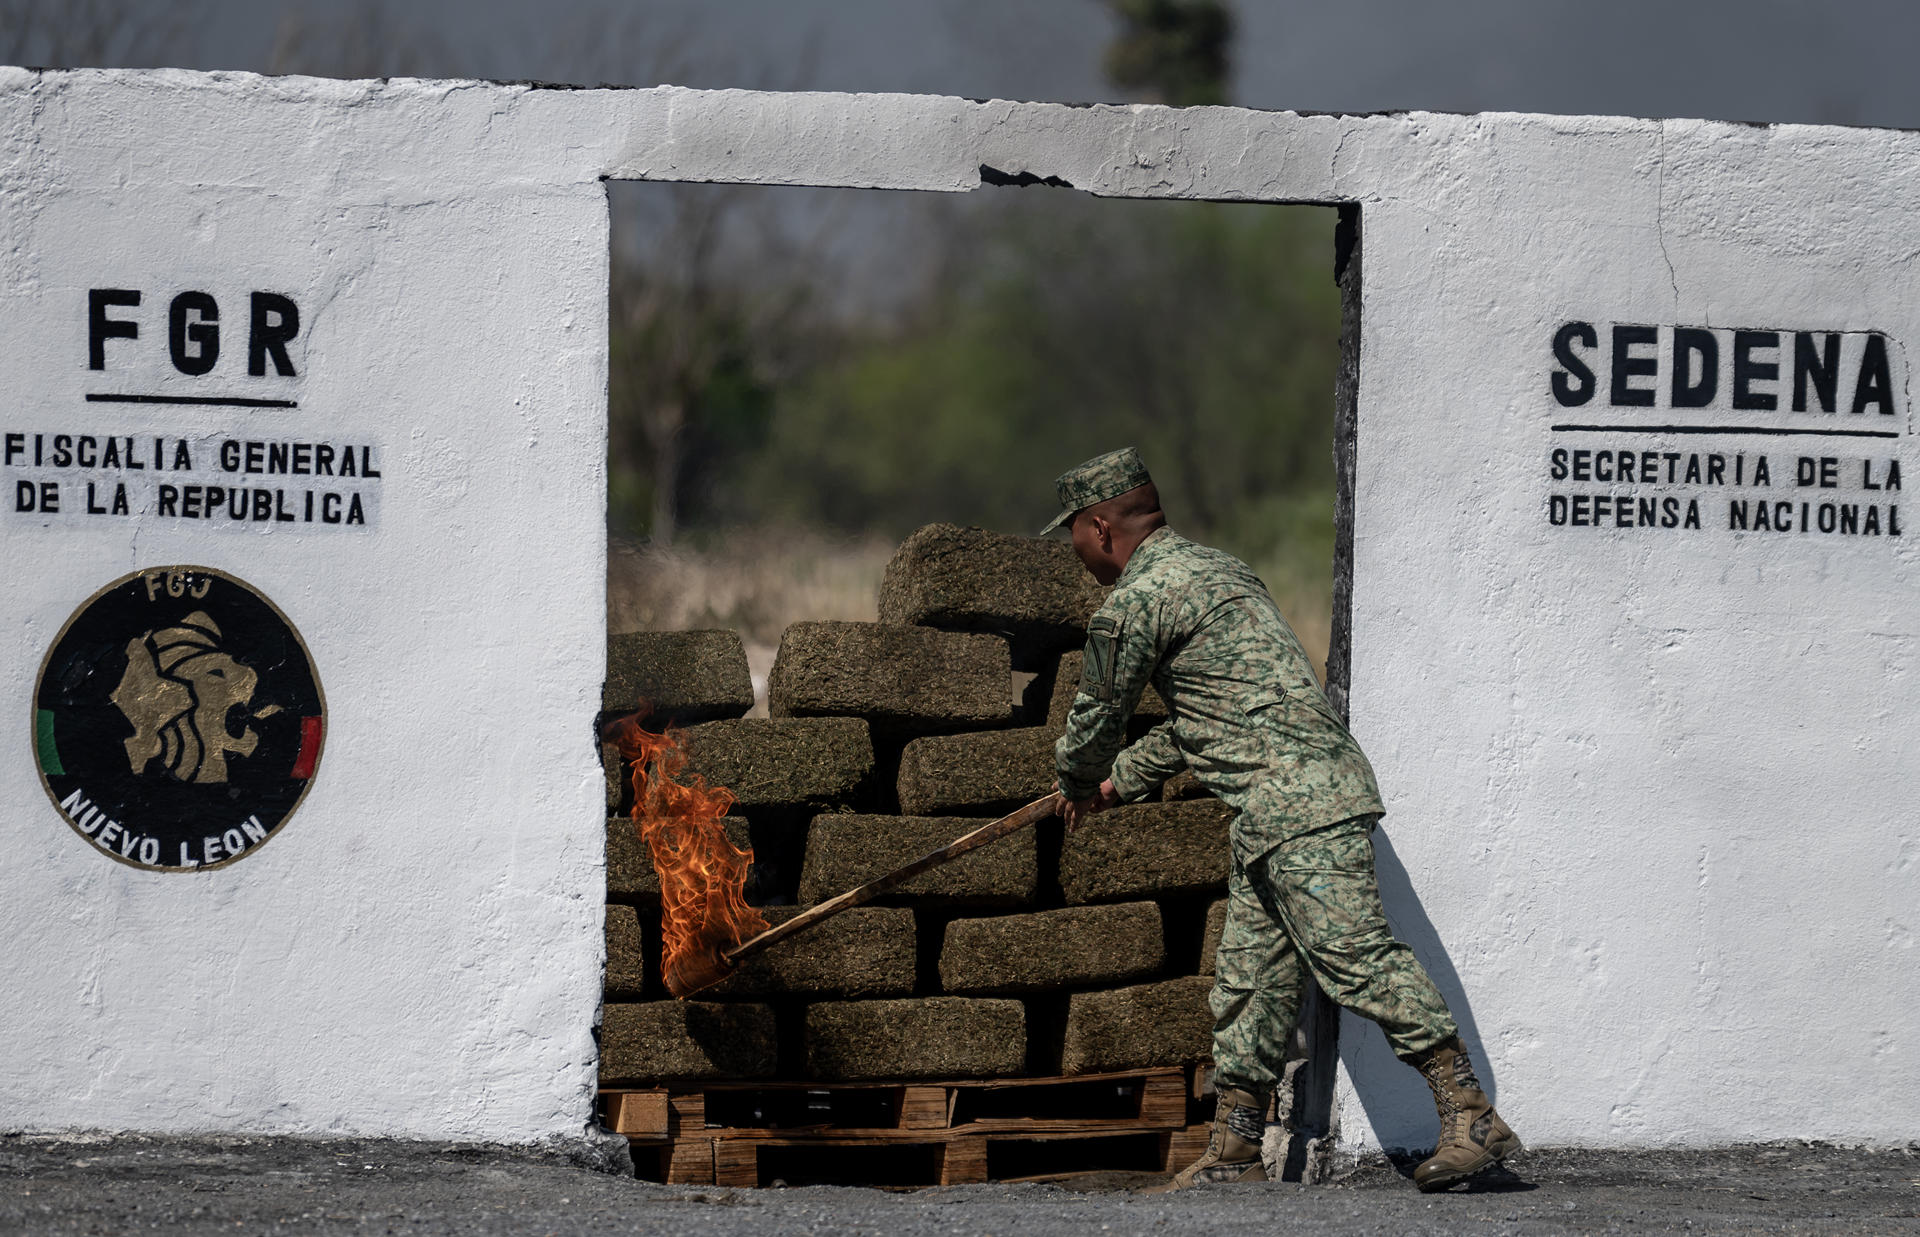 mexican-army-burns-more-than-400-kilos-of-narcotics-in-a-state-bordering-the-united-states-after-a-bloody-week